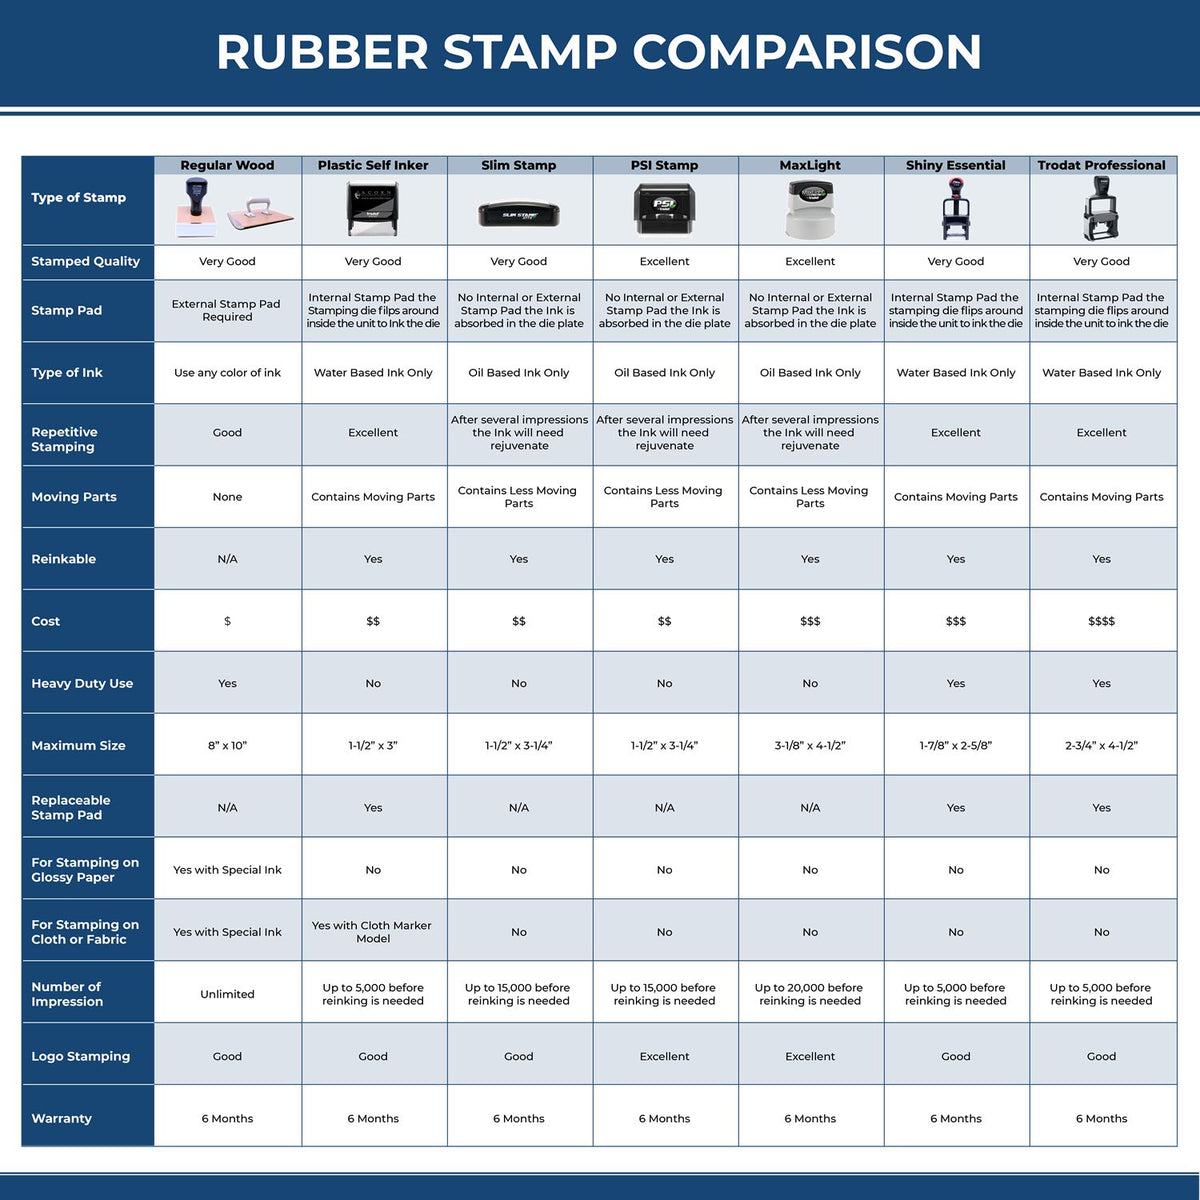 A comparison chart for the different types of mount models available for the Colorado Professional Engineer Seal Stamp.